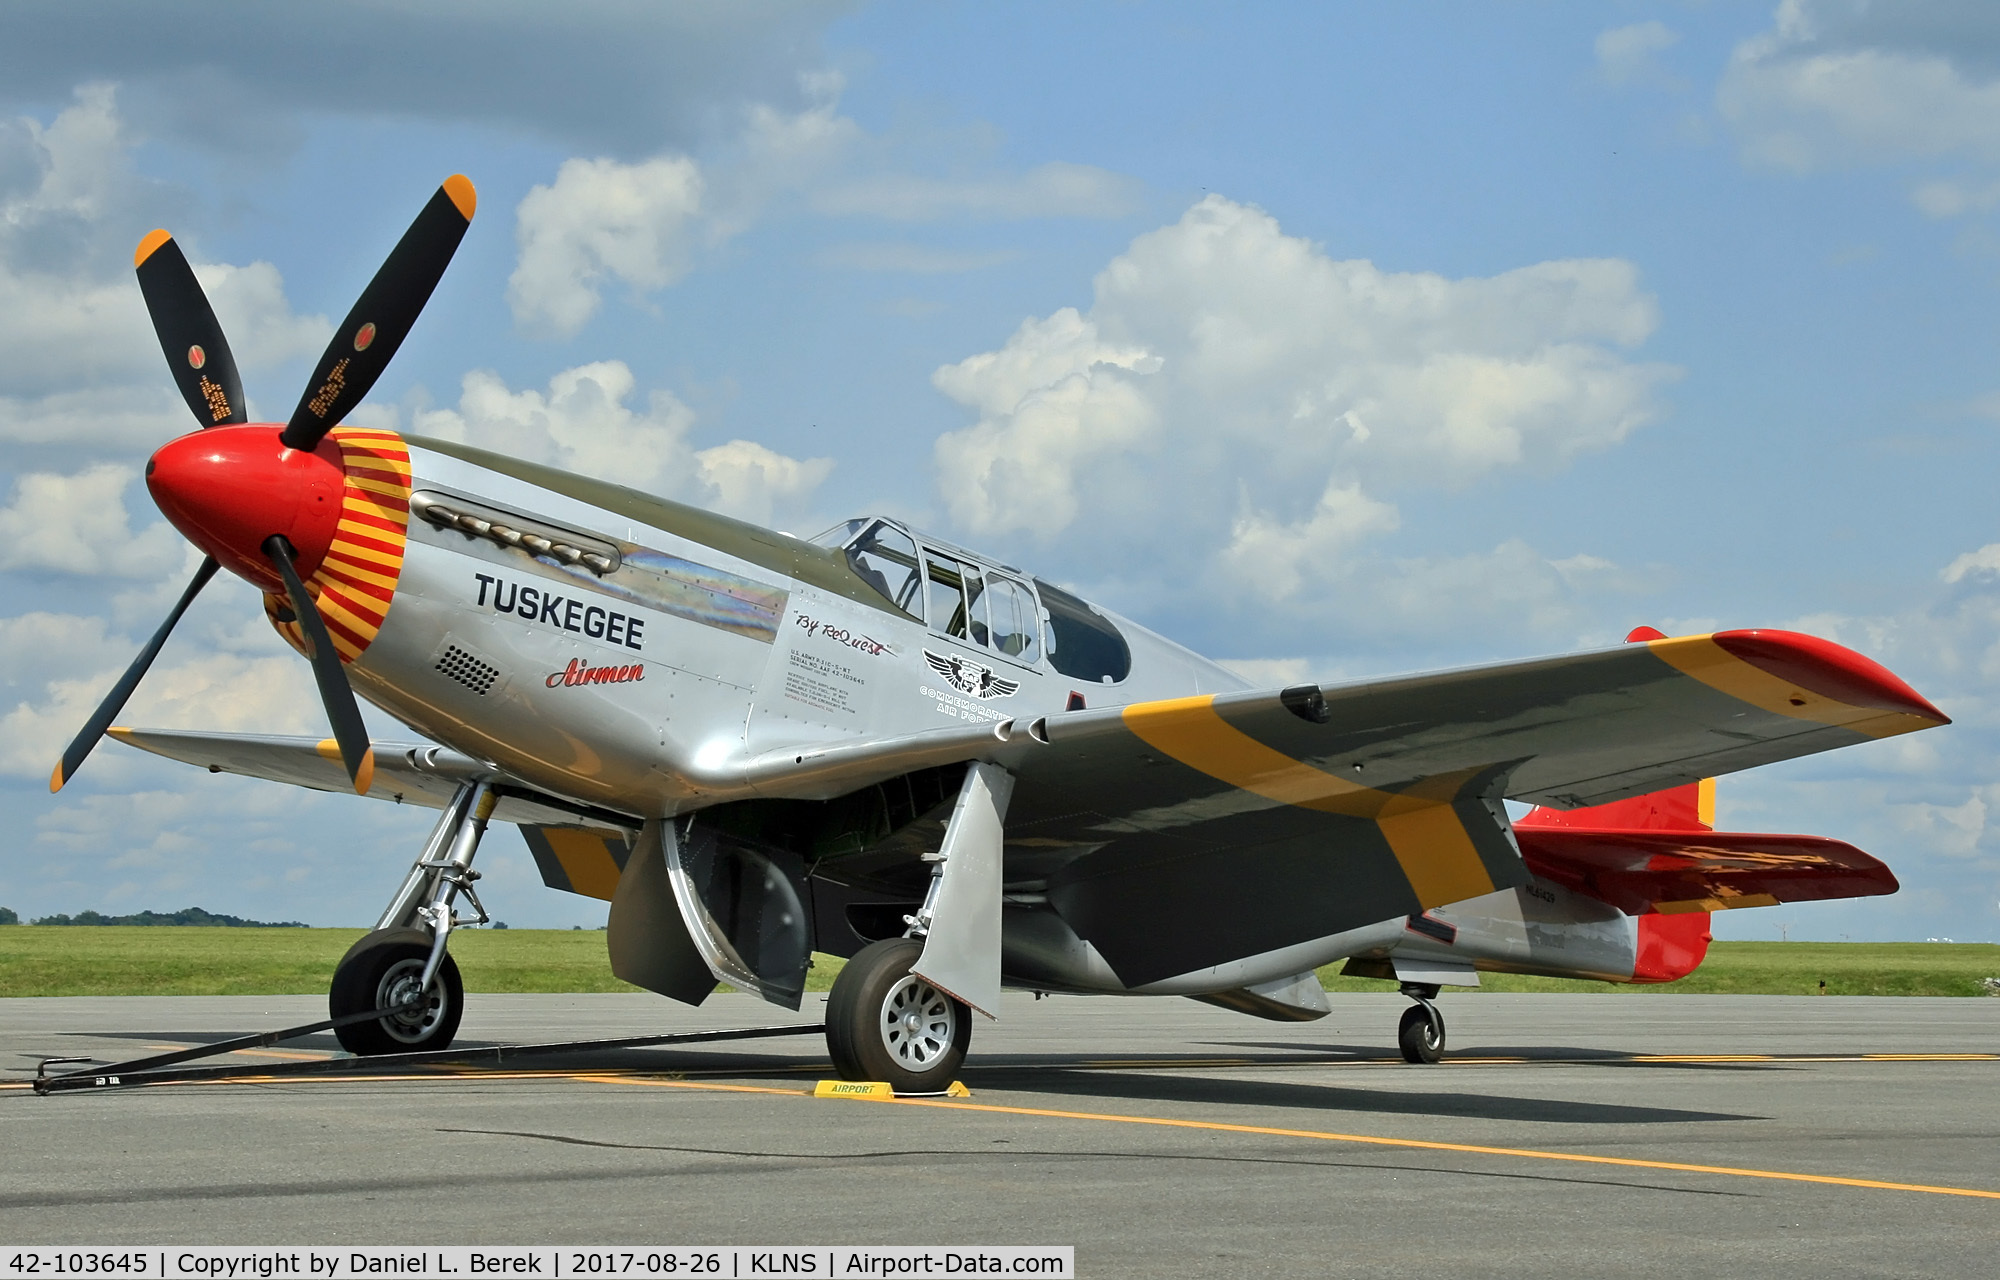 42-103645, 1942 North American P-51C Mustang C/N 103-26199, This Mustang commemorates the service and bravery of the Tuskegee airmen.